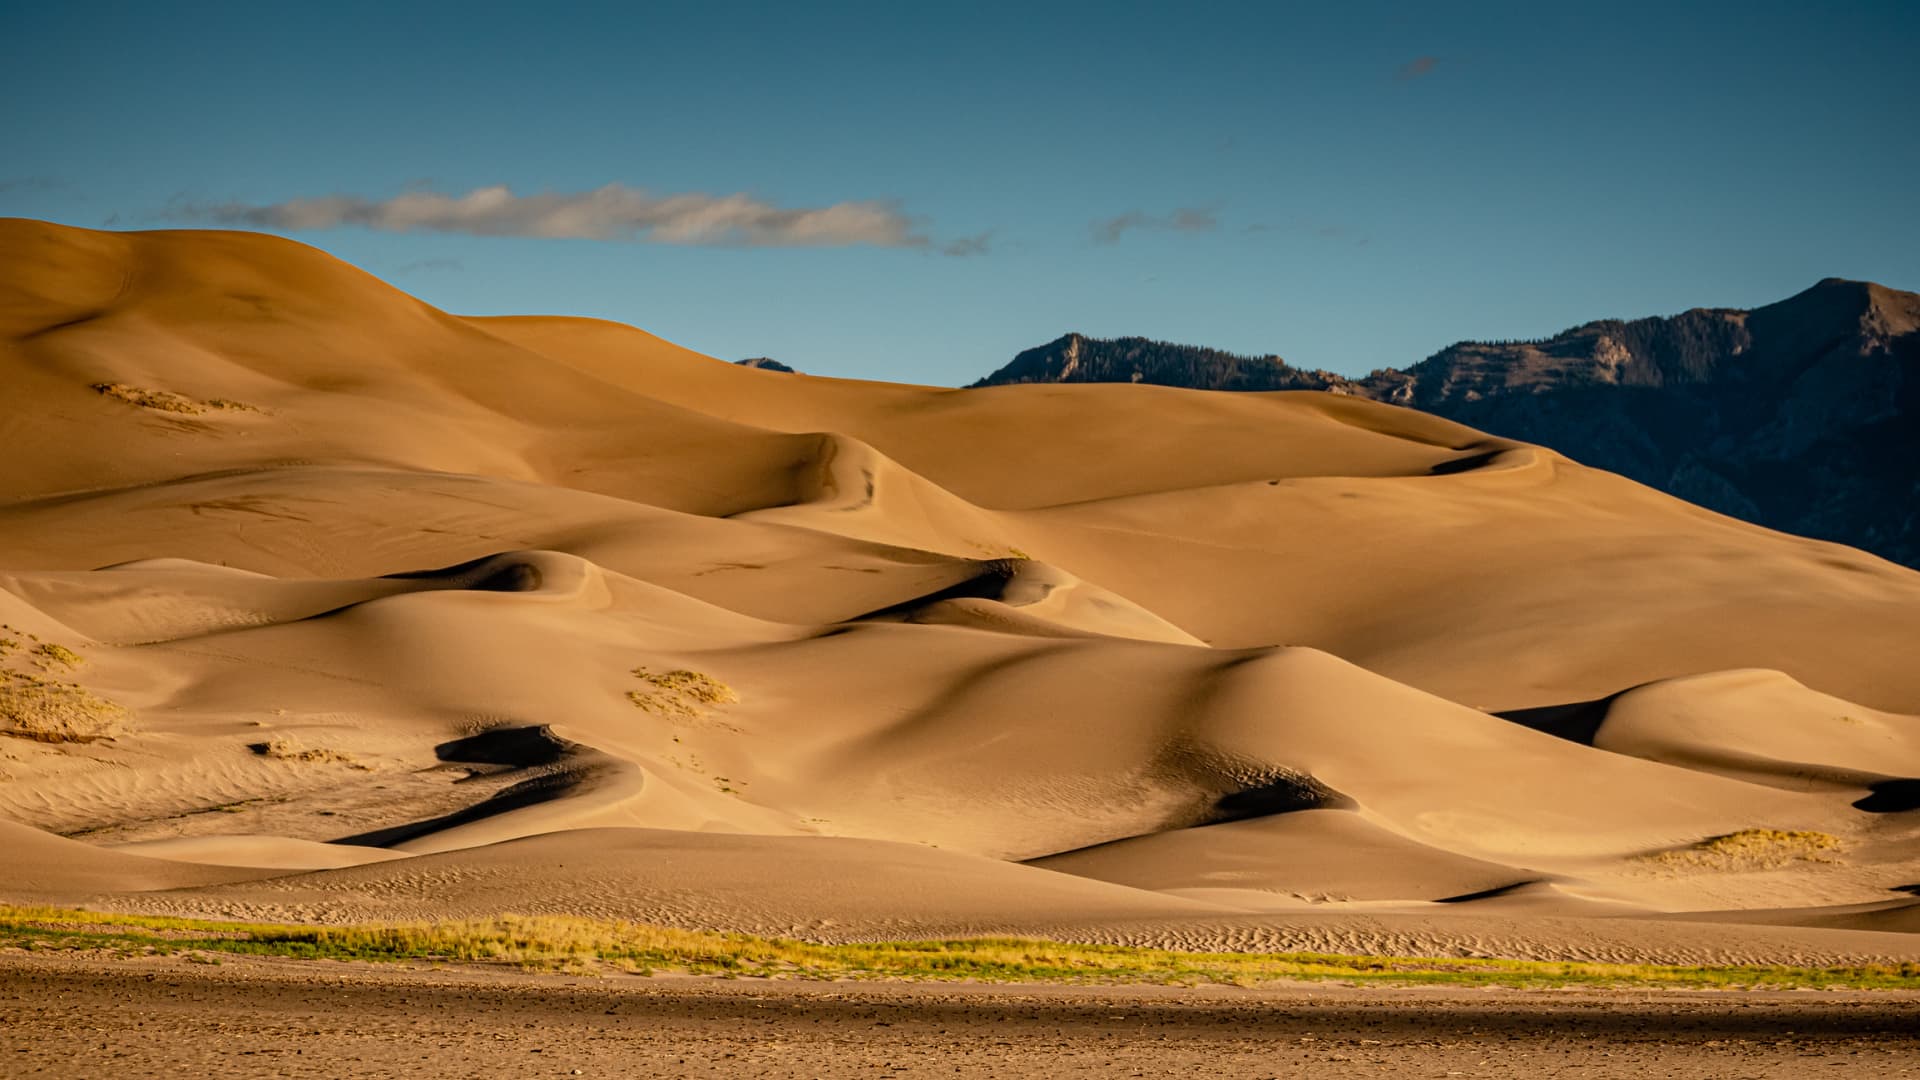 With 30 square miles of sand, the Great Sand Dunes near Alamosa, Colo. are attracting visitors seeking remote outdoor vacations.